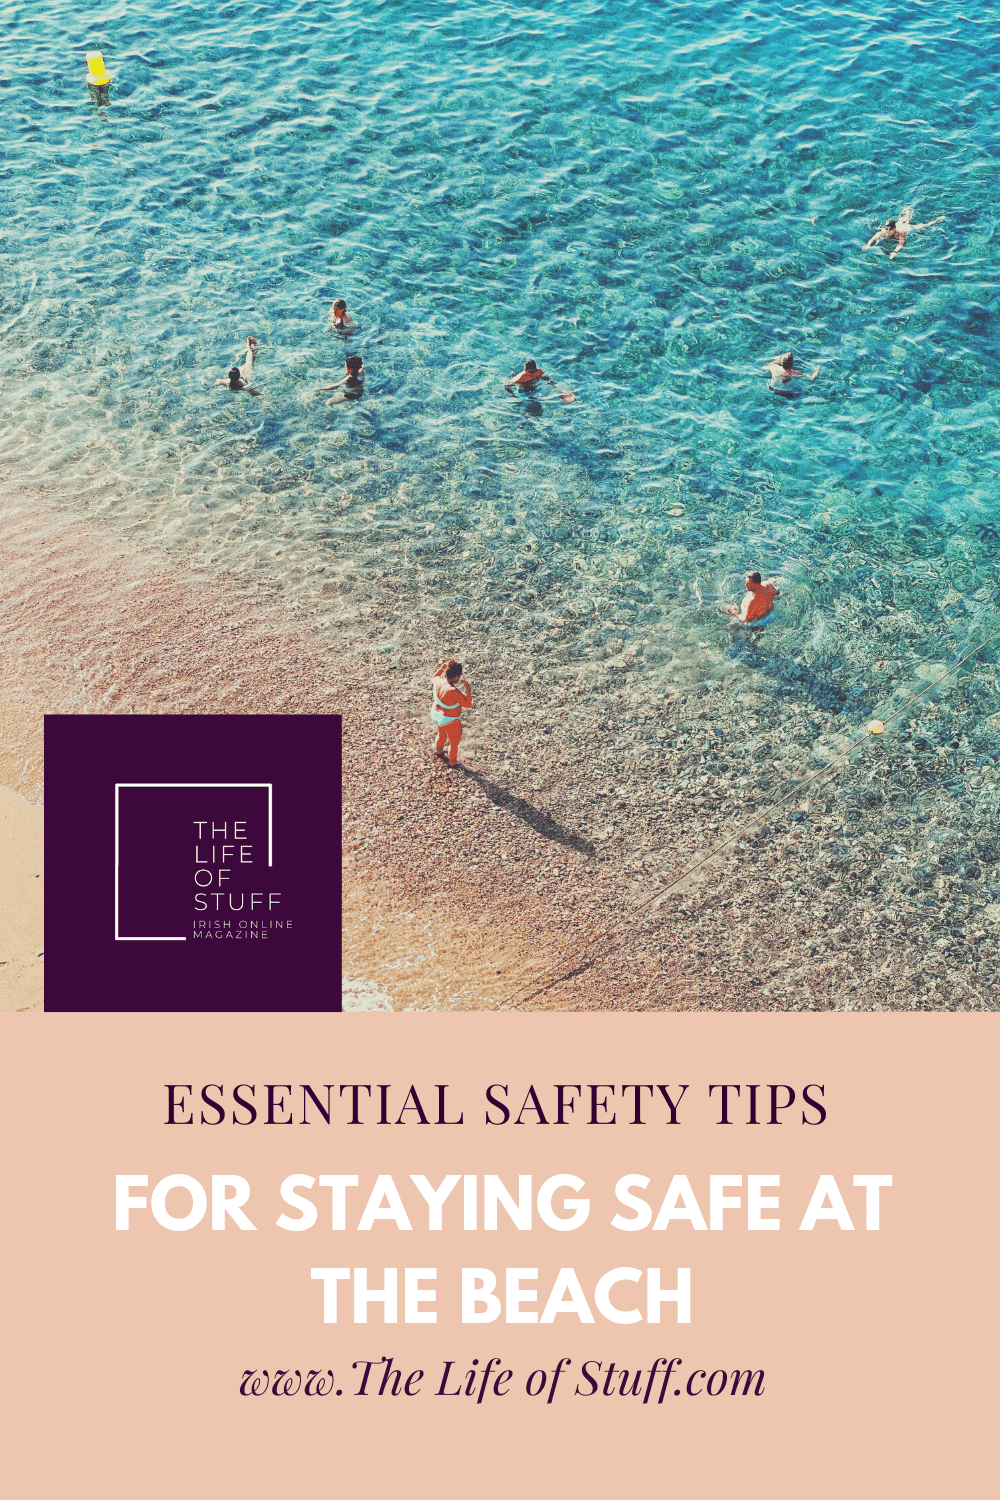 Essential Safety Tips for Staying Safe At The Beach - The Life of Stuff